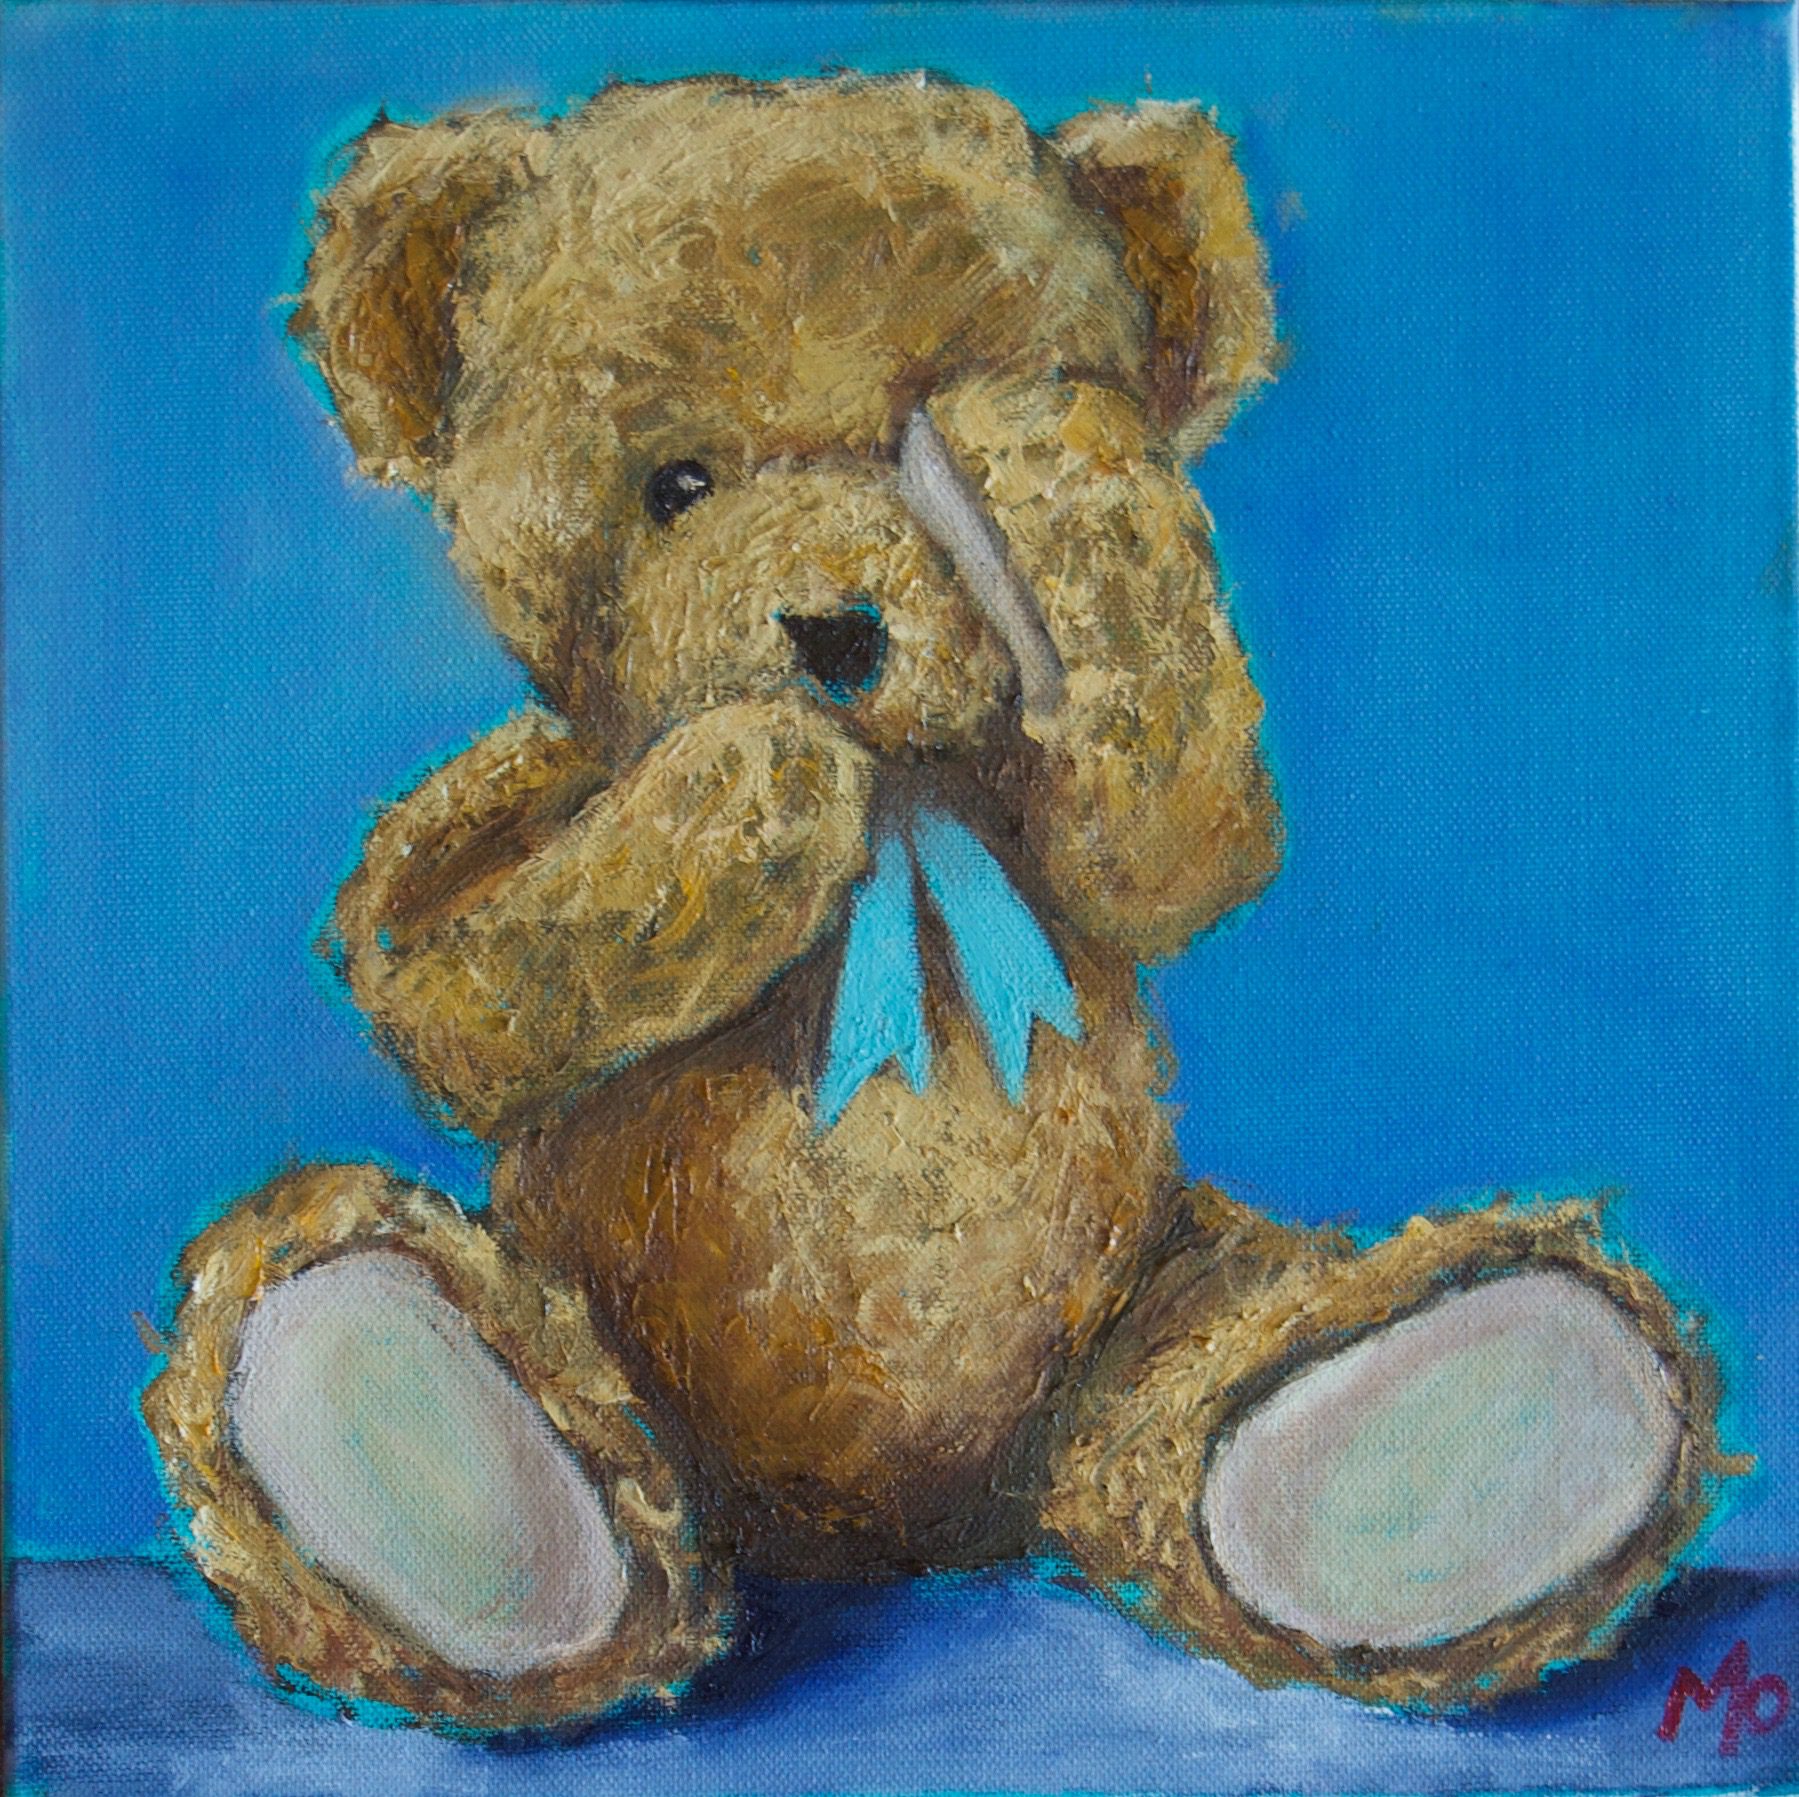 Teddy Bear with paw over one eye